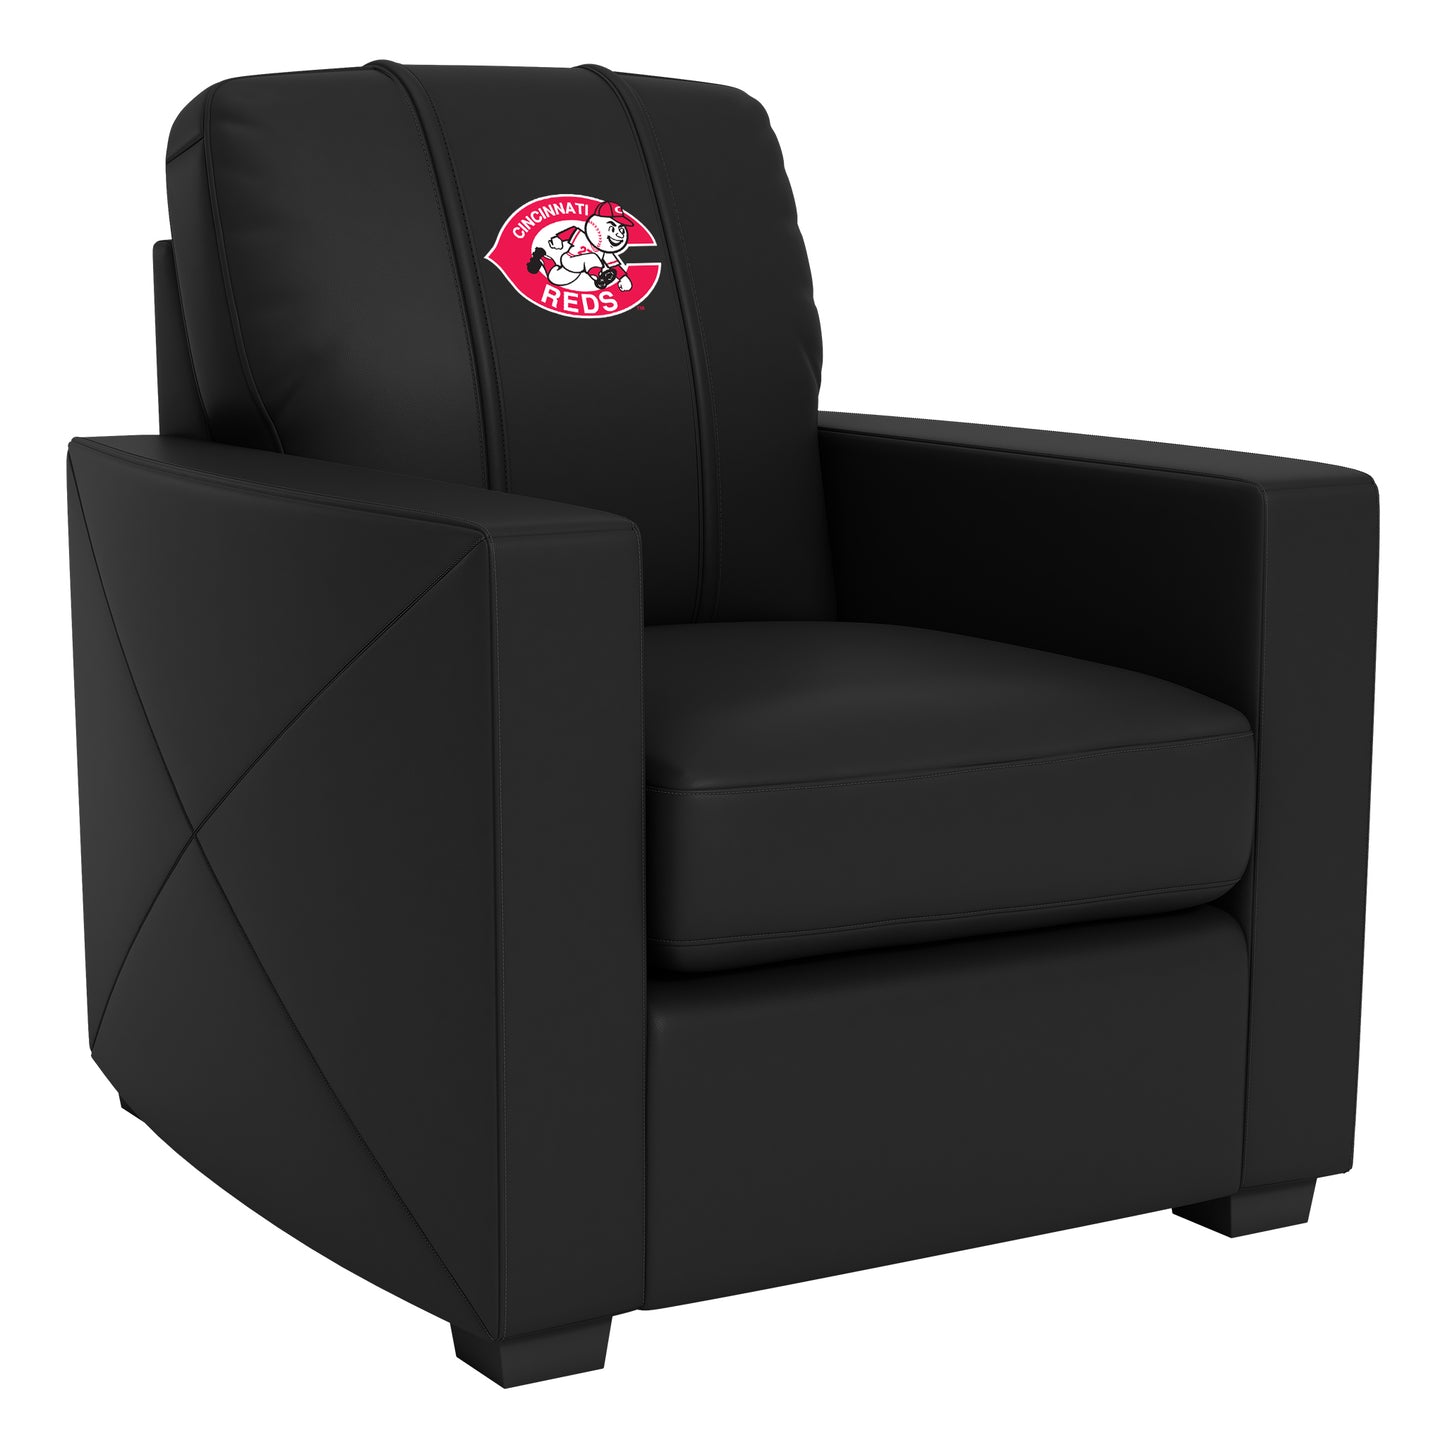 Silver Club Chair with Cincinnati Reds Cooperstown